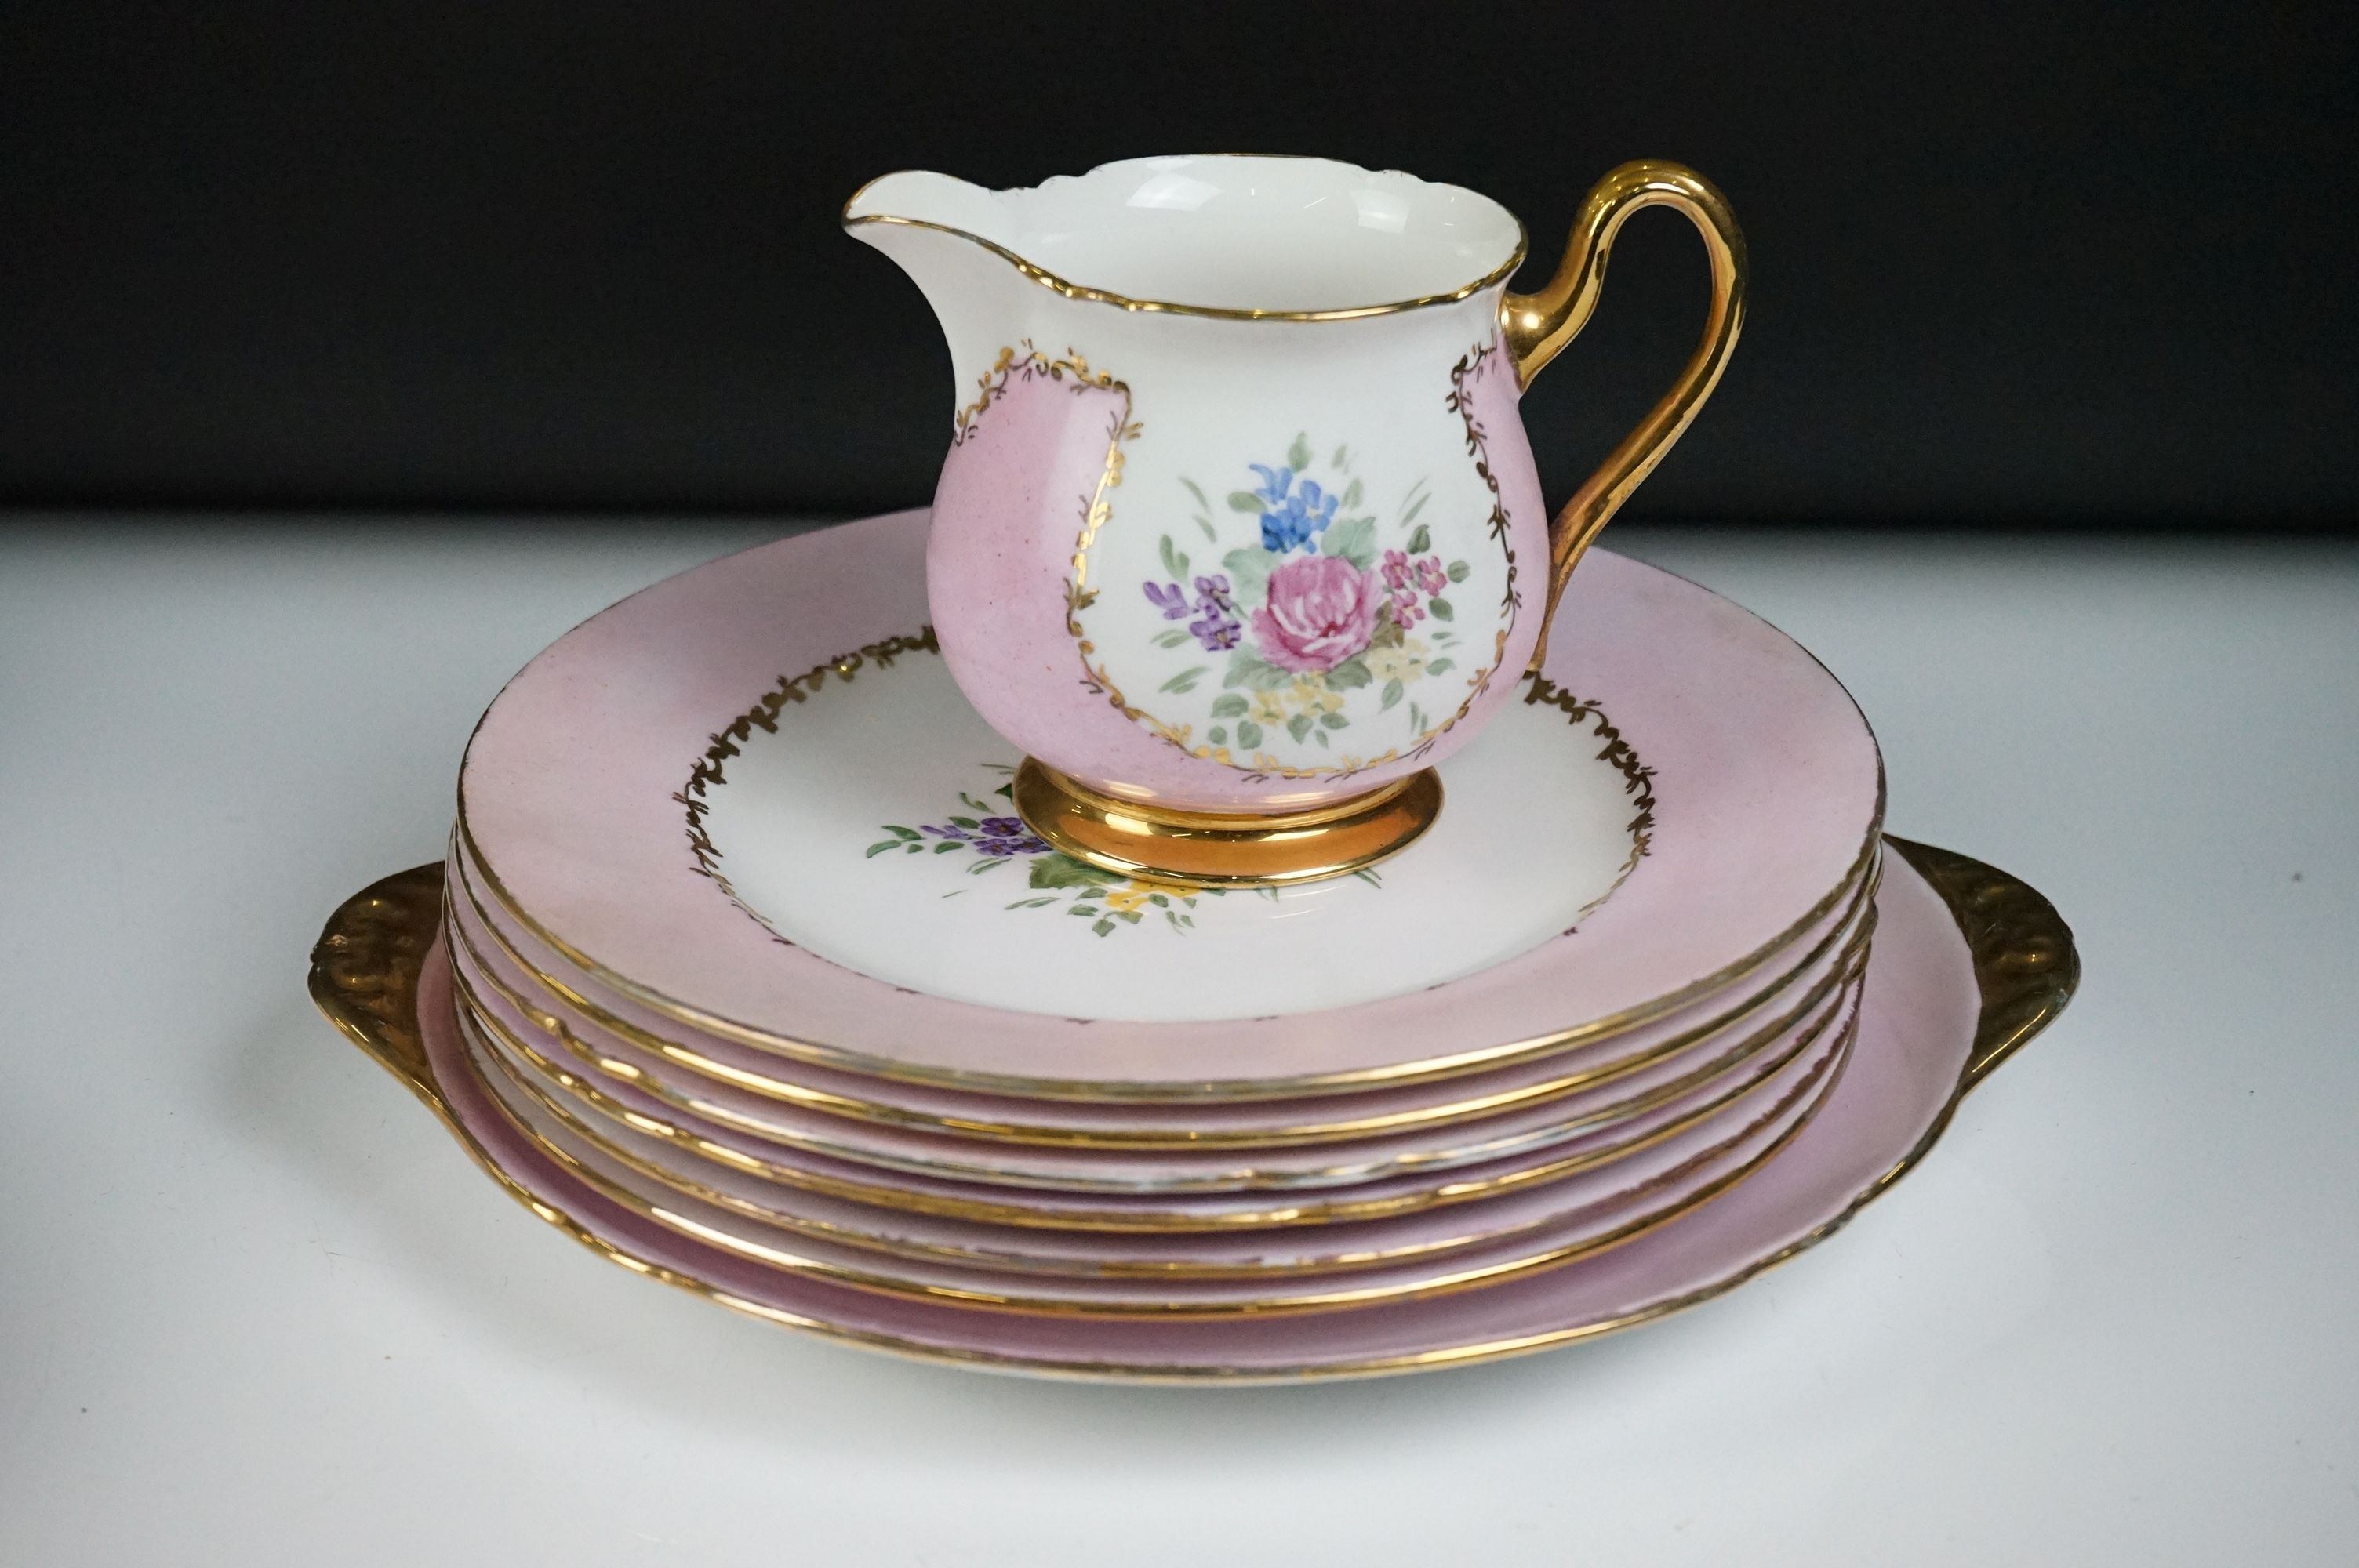 Early 20th Century Shelley hand painted floral tea ware on pink and white ground, with gilt - Image 8 of 12